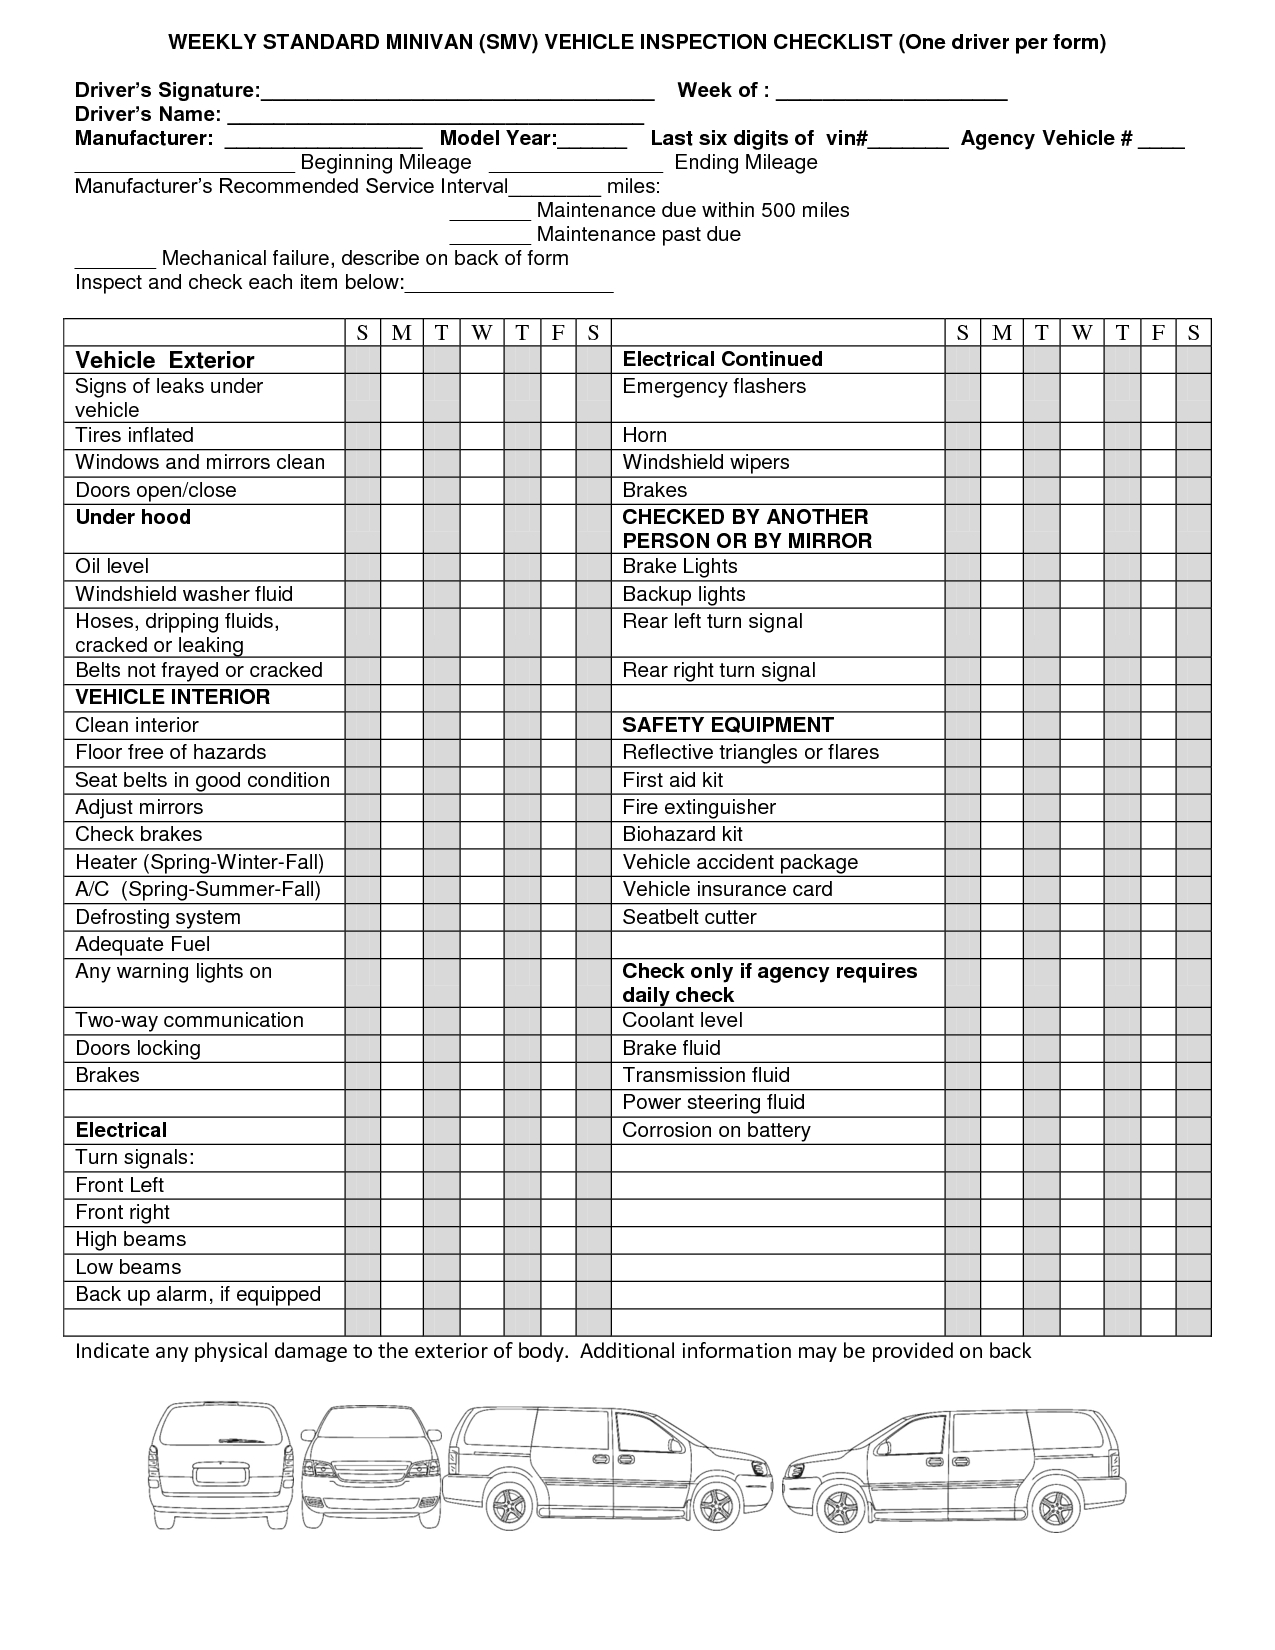 Weekly Vehicle Inspection Checklist Template | Car Maintenance Tips - Free Printable Vehicle Inspection Form